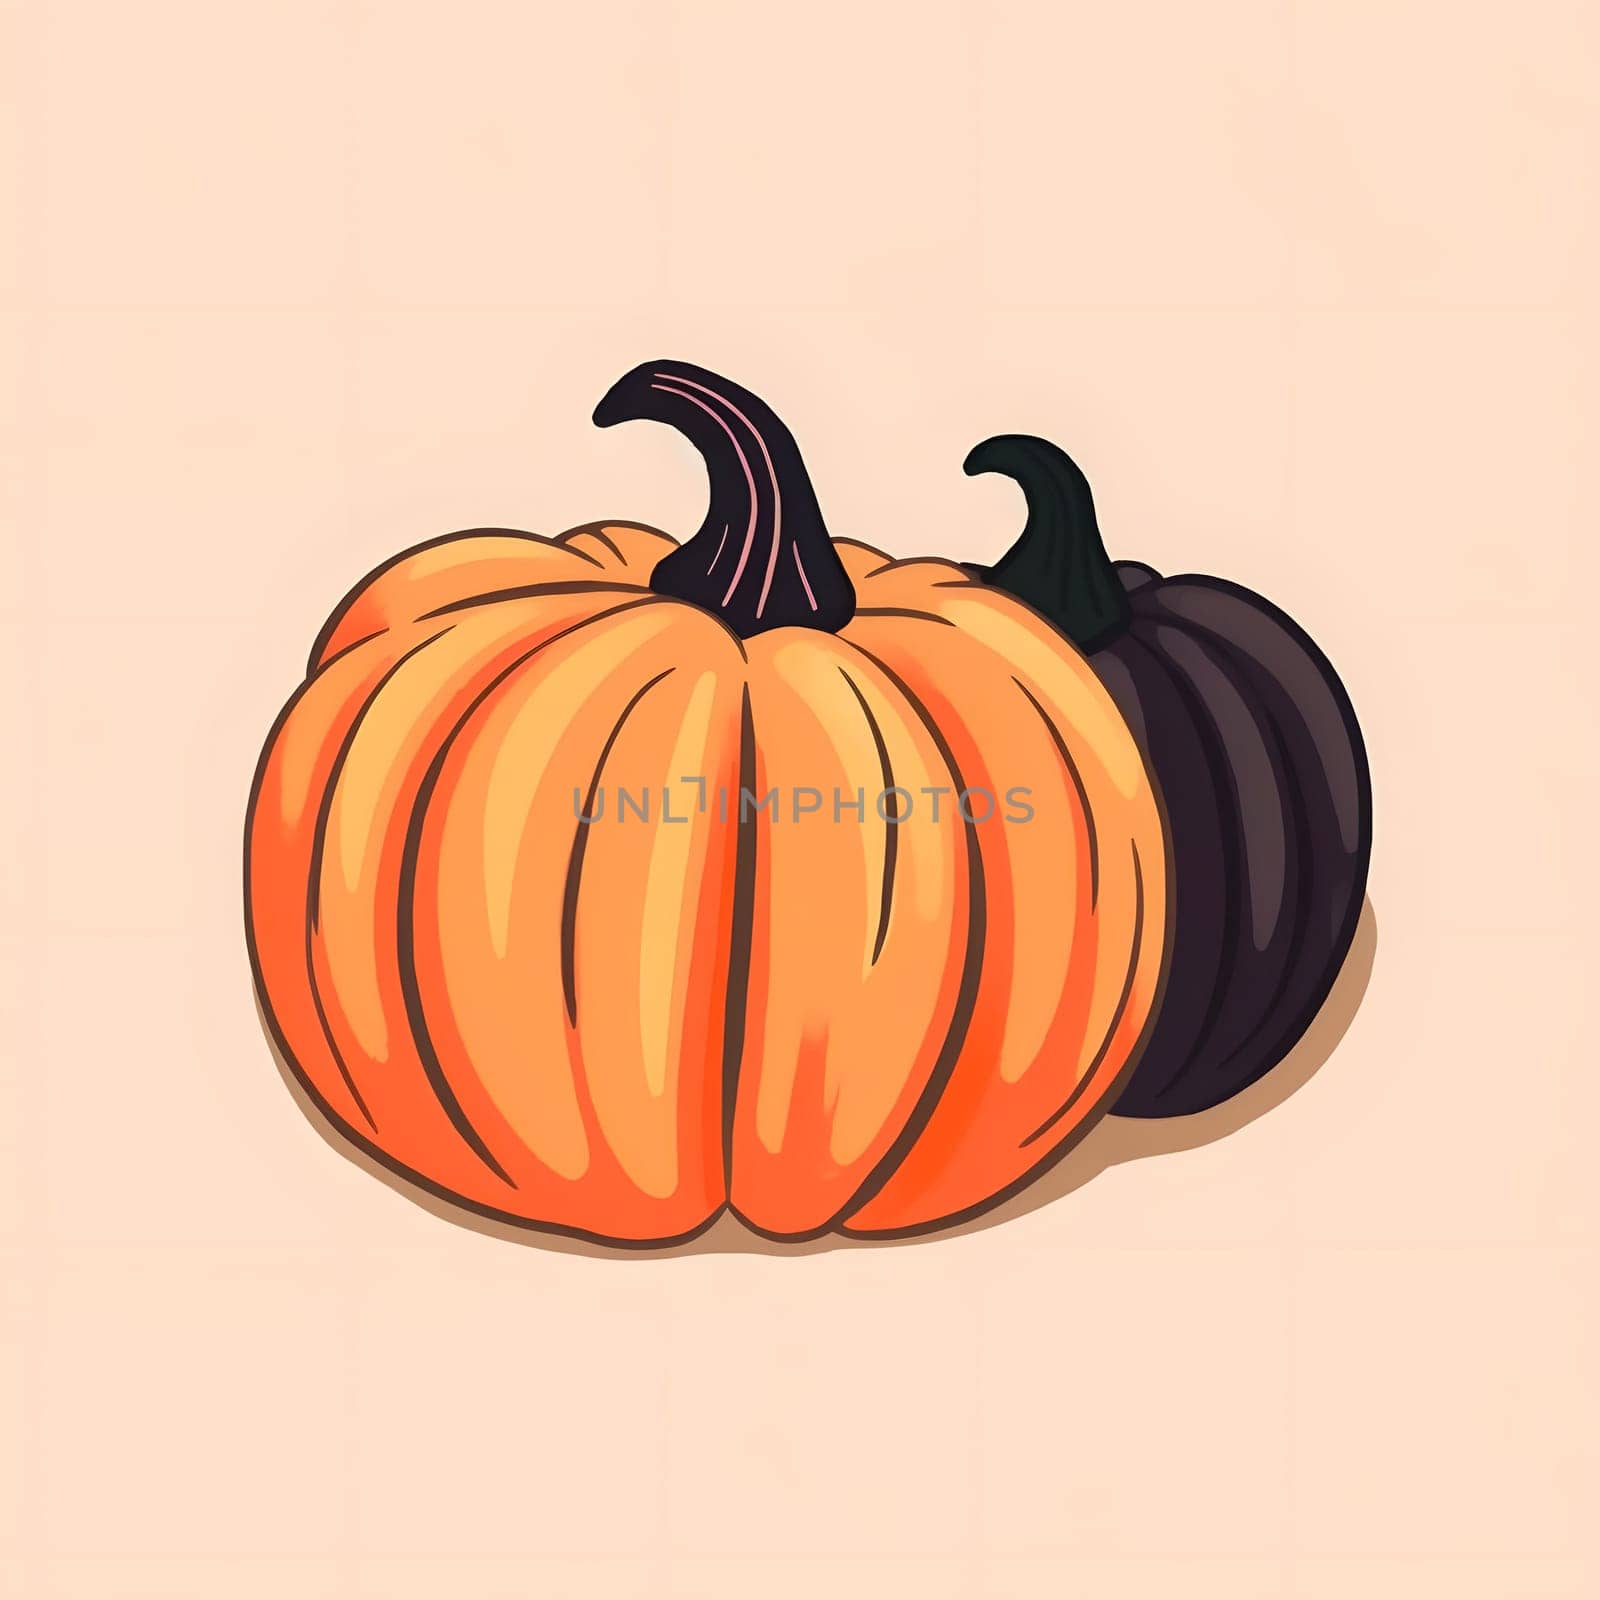 Orange and black pumpkin on light in isolated background. Pumpkin as a dish of thanksgiving for the harvest. by ThemesS